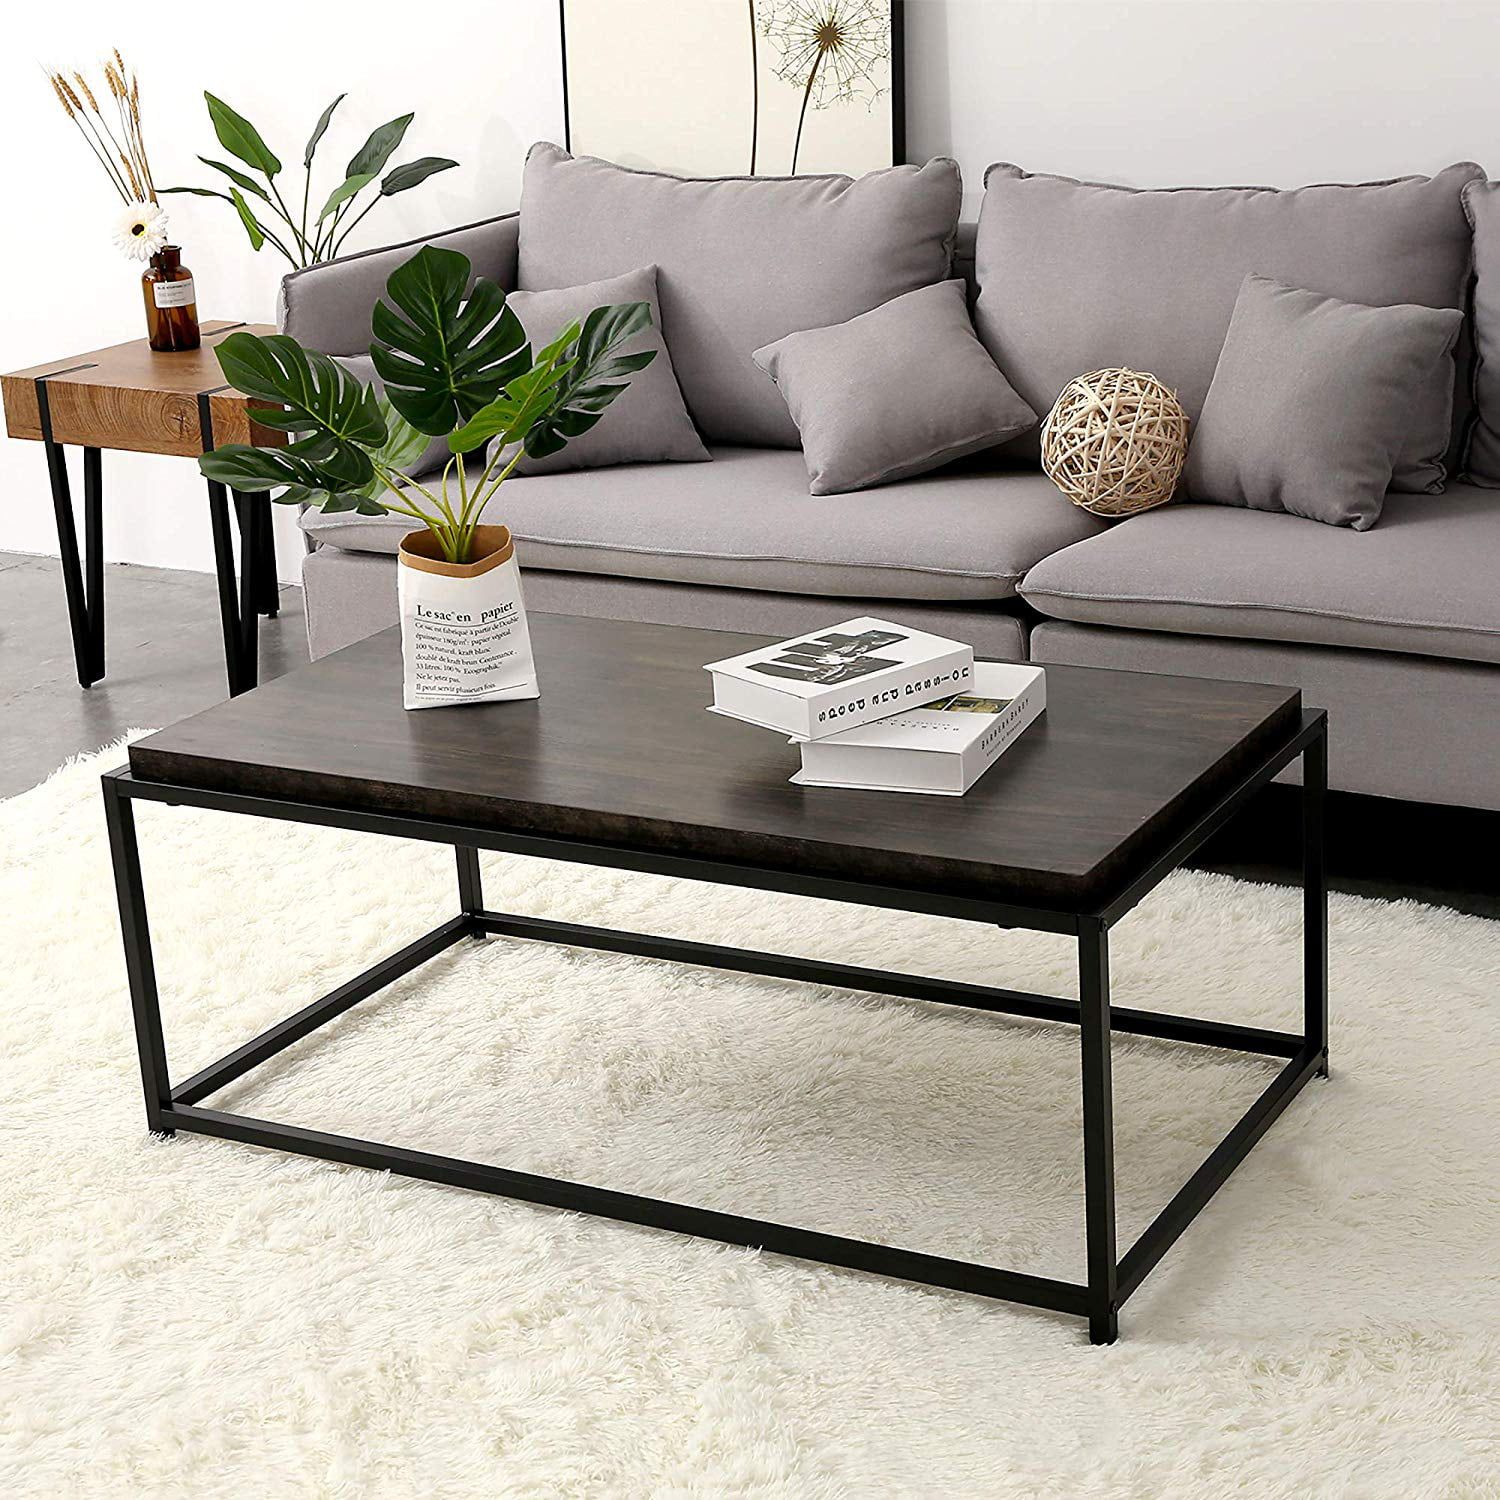 Ivinta Wood Coffee Table Modern Industrial Space Saving Couch Living With Regard To Espresso Wood Finish Coffee Tables (View 9 of 21)